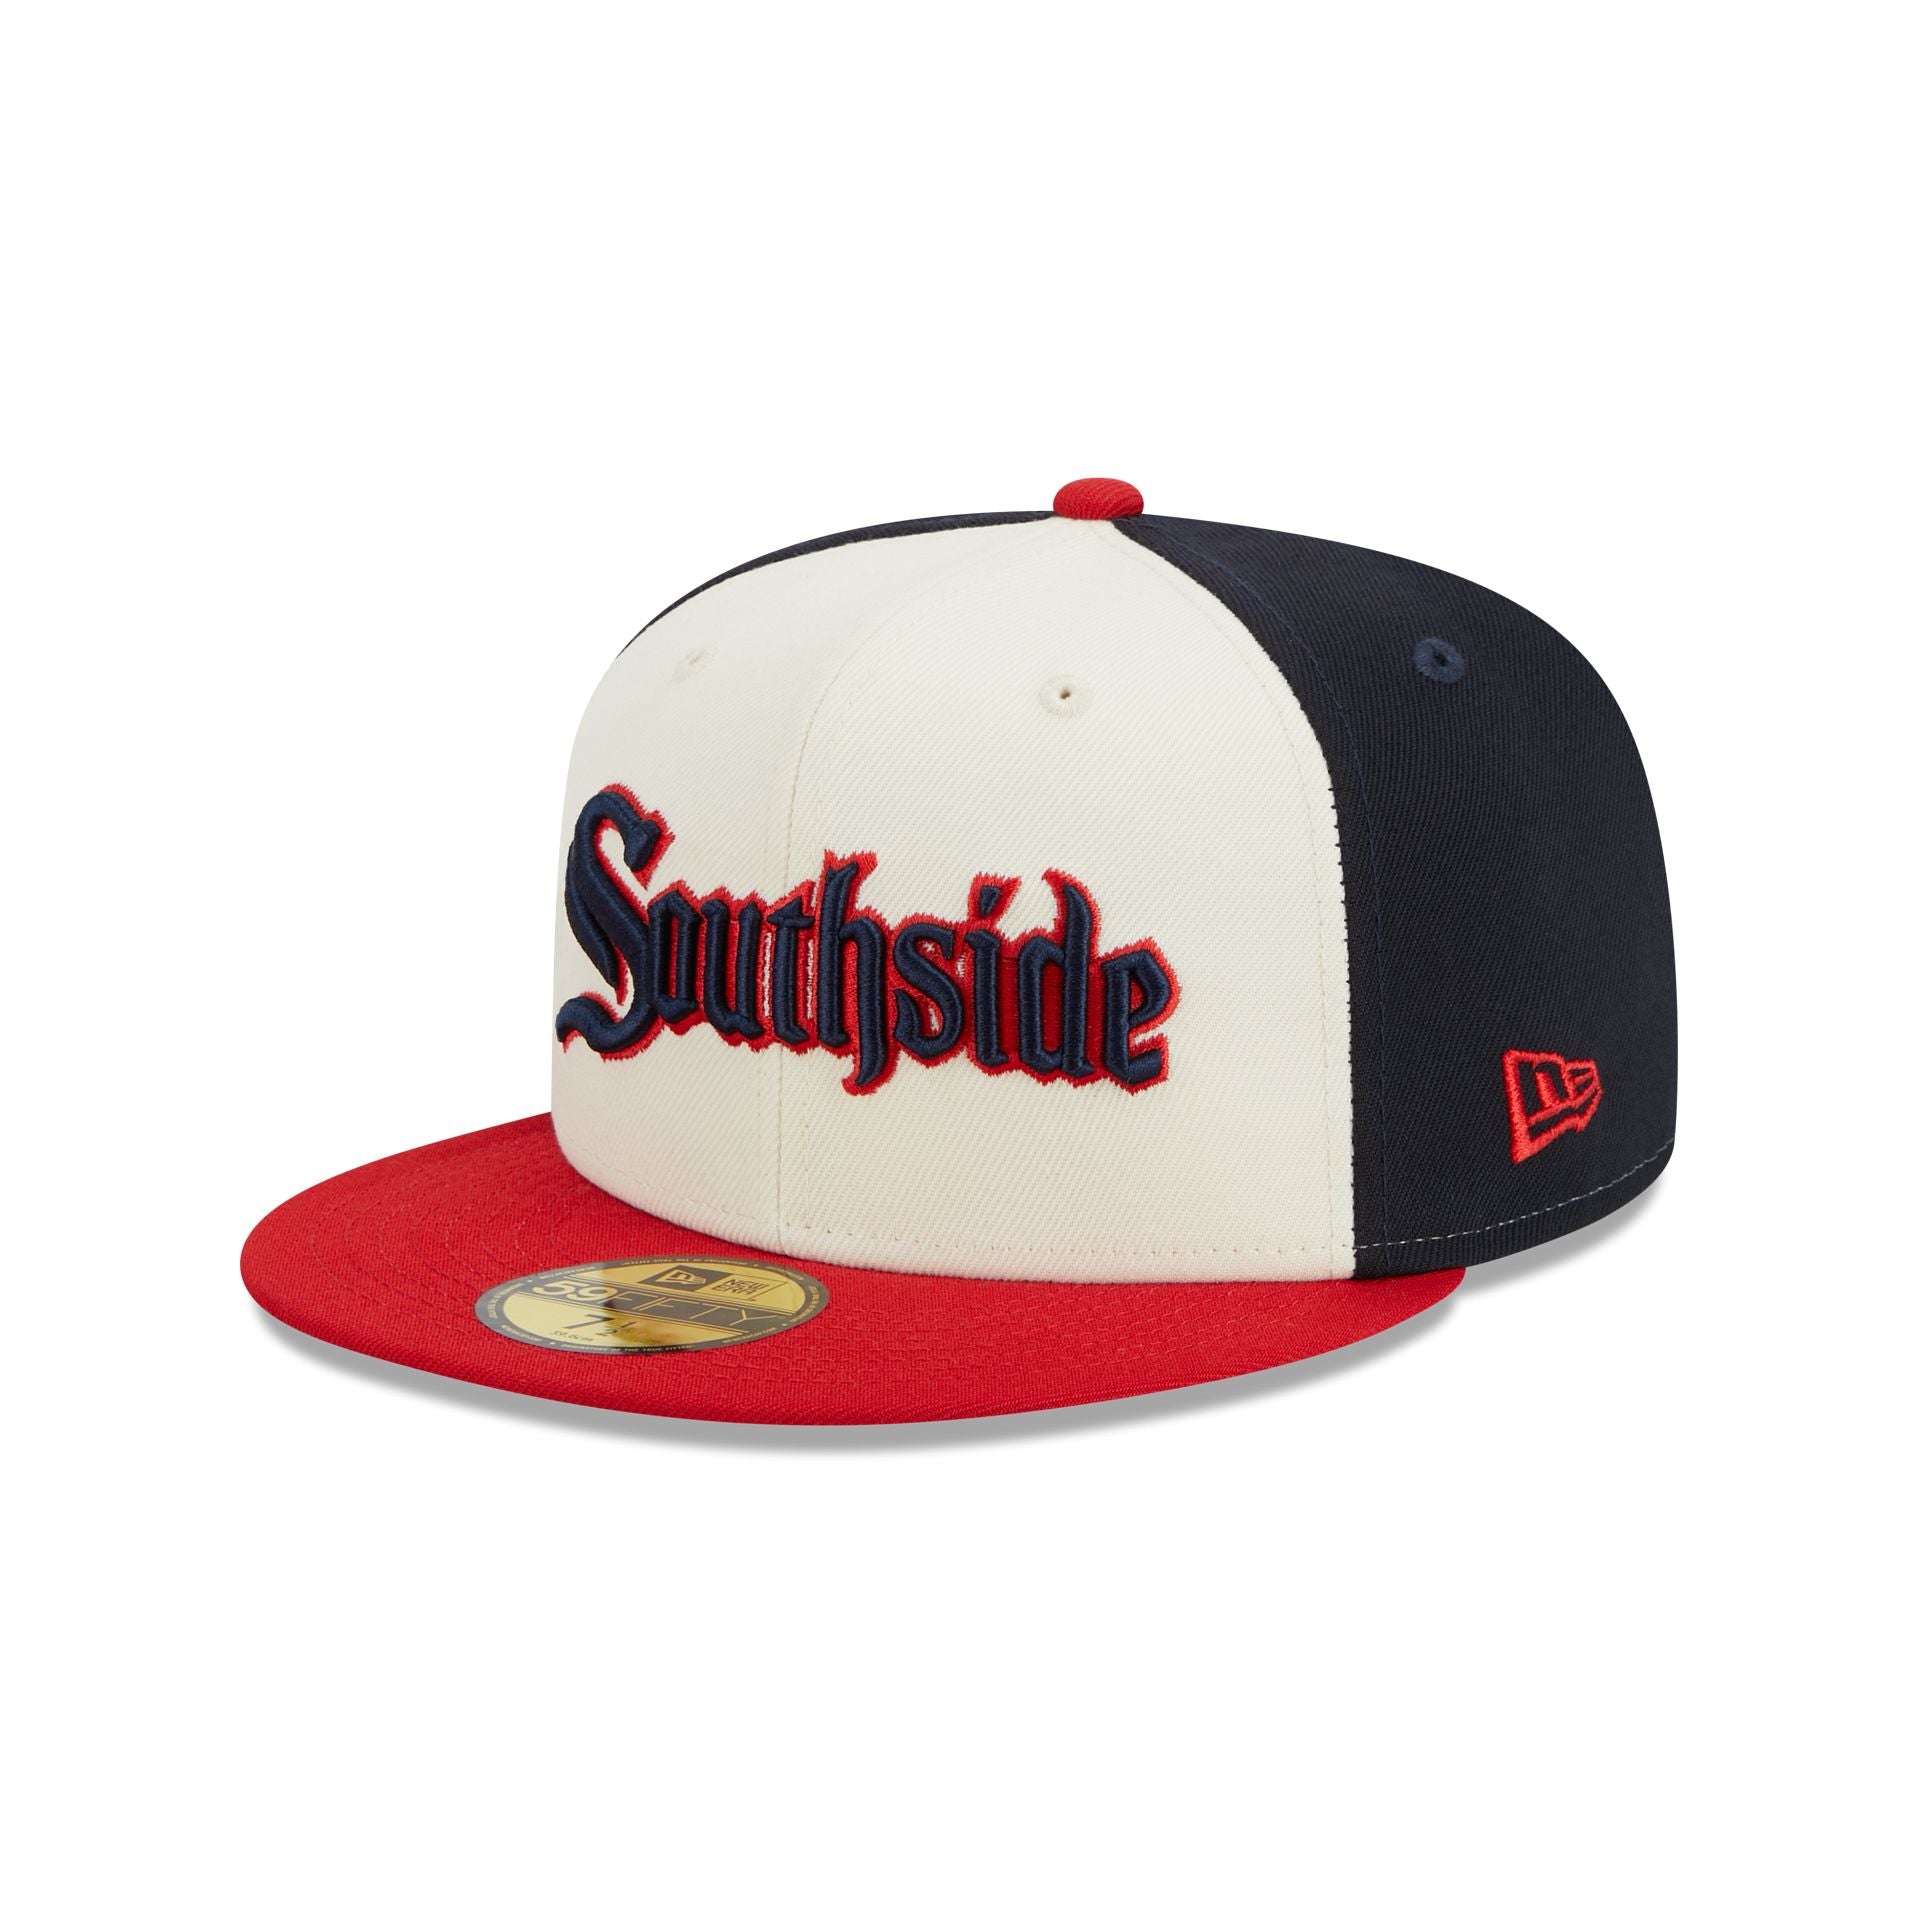 University of Louisville Mens Fitted Hat, Louisville Cardinals Fitted